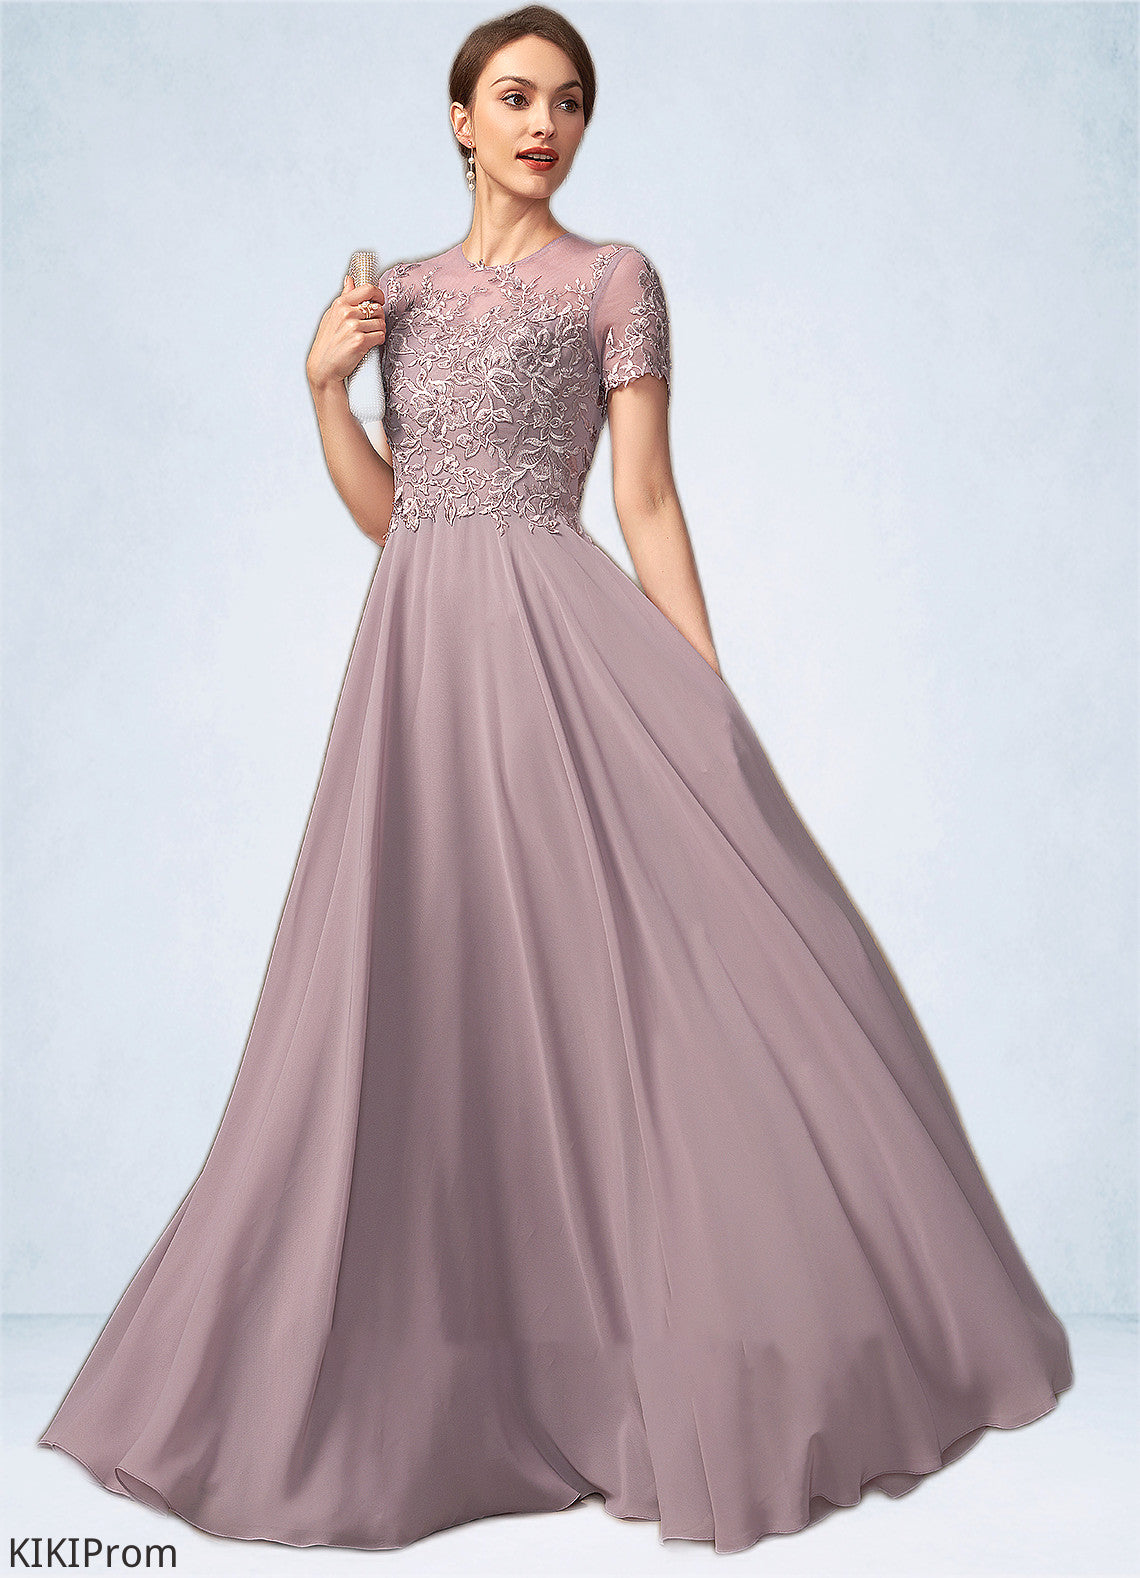 Everly A-Line Scoop Neck Floor-Length Chiffon Lace Mother of the Bride Dress With Beading Sequins DZ126P0014987